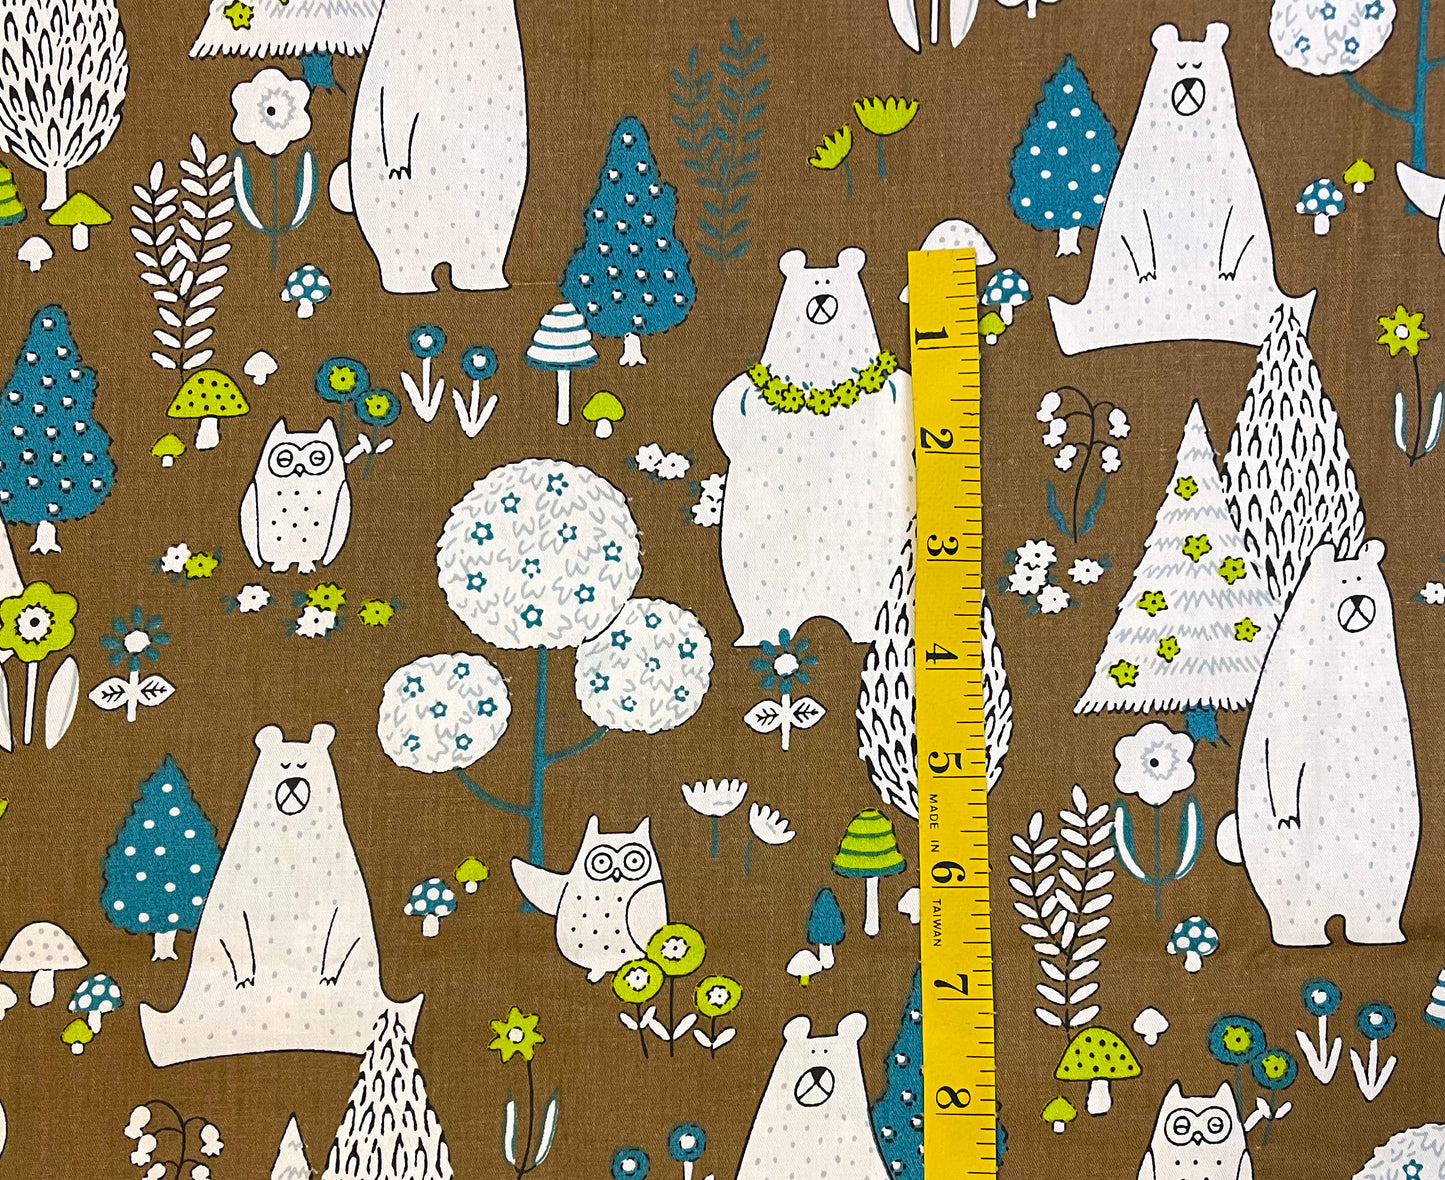 Bears in the woods